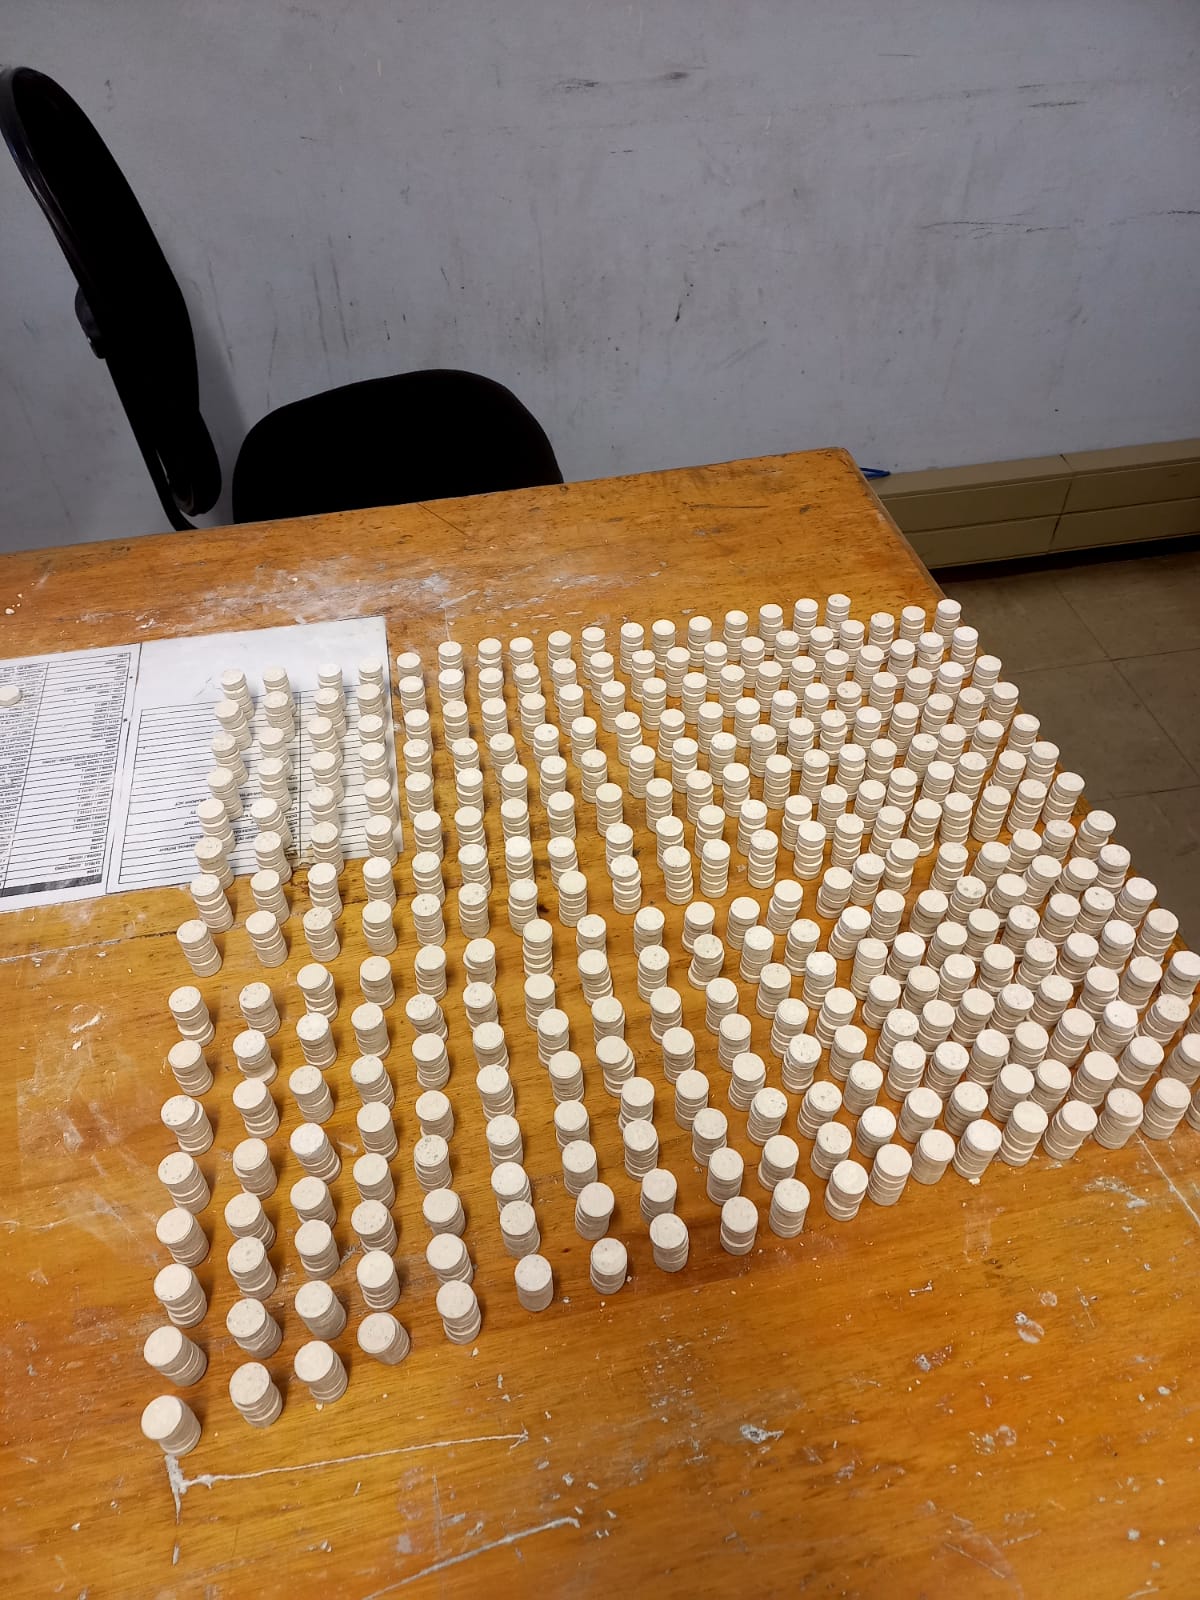 Suspect arrested with mandrax with an estimated street value of R 100 000 in Steenberg